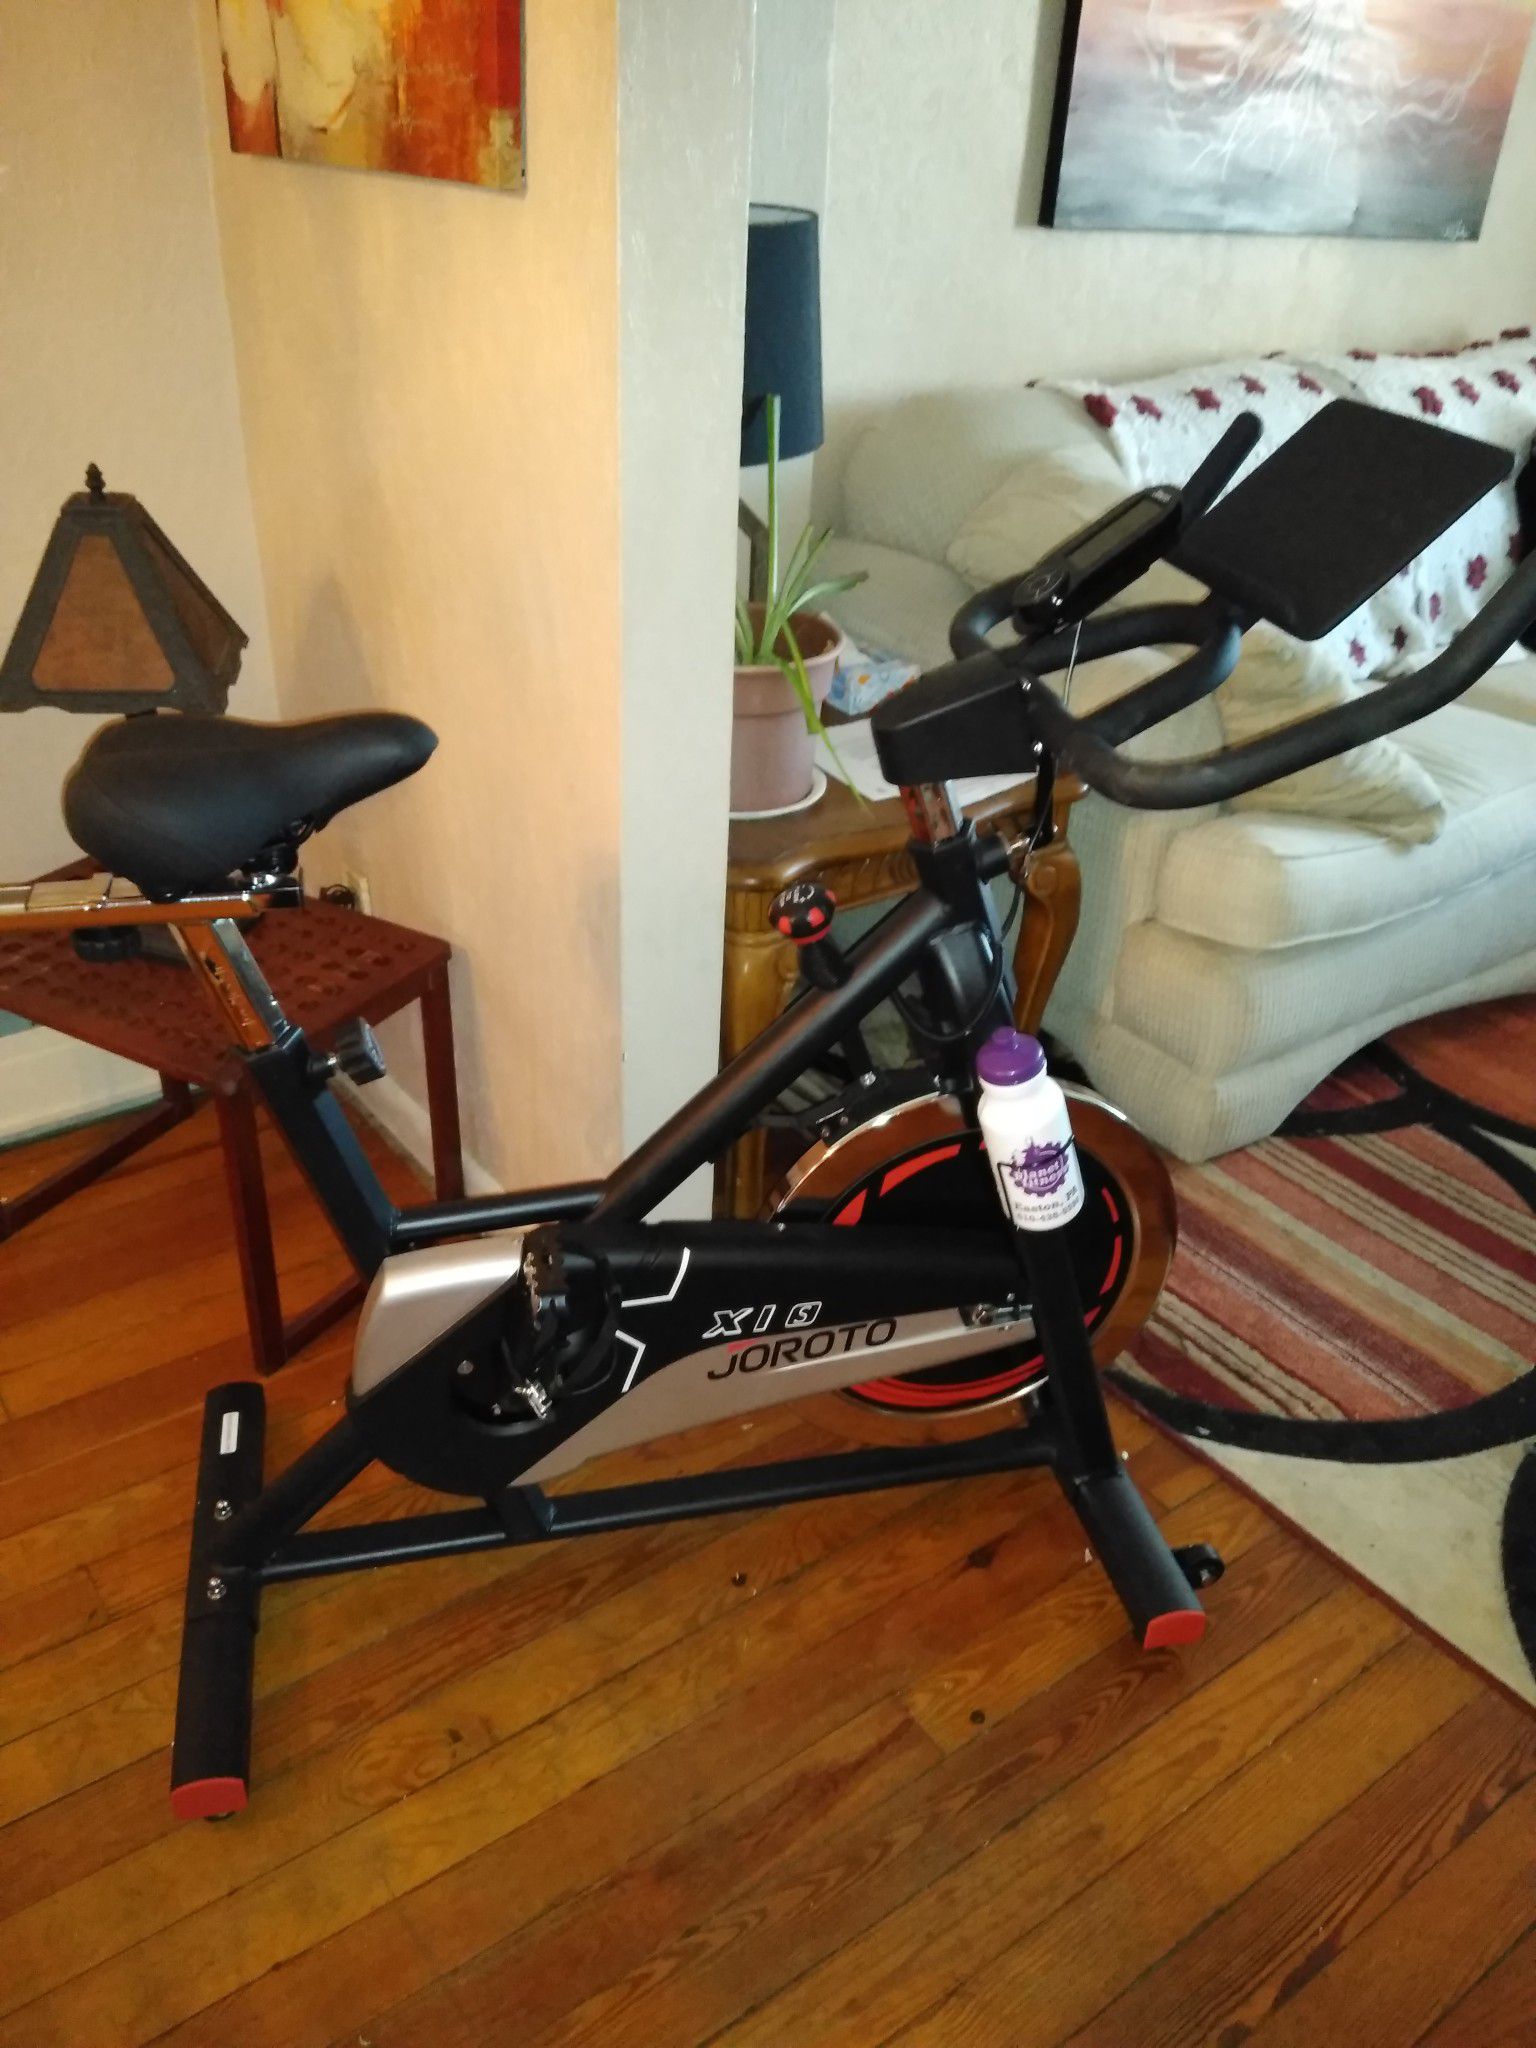 XIs Joroto exercise bike. You must pick it up no delivery.